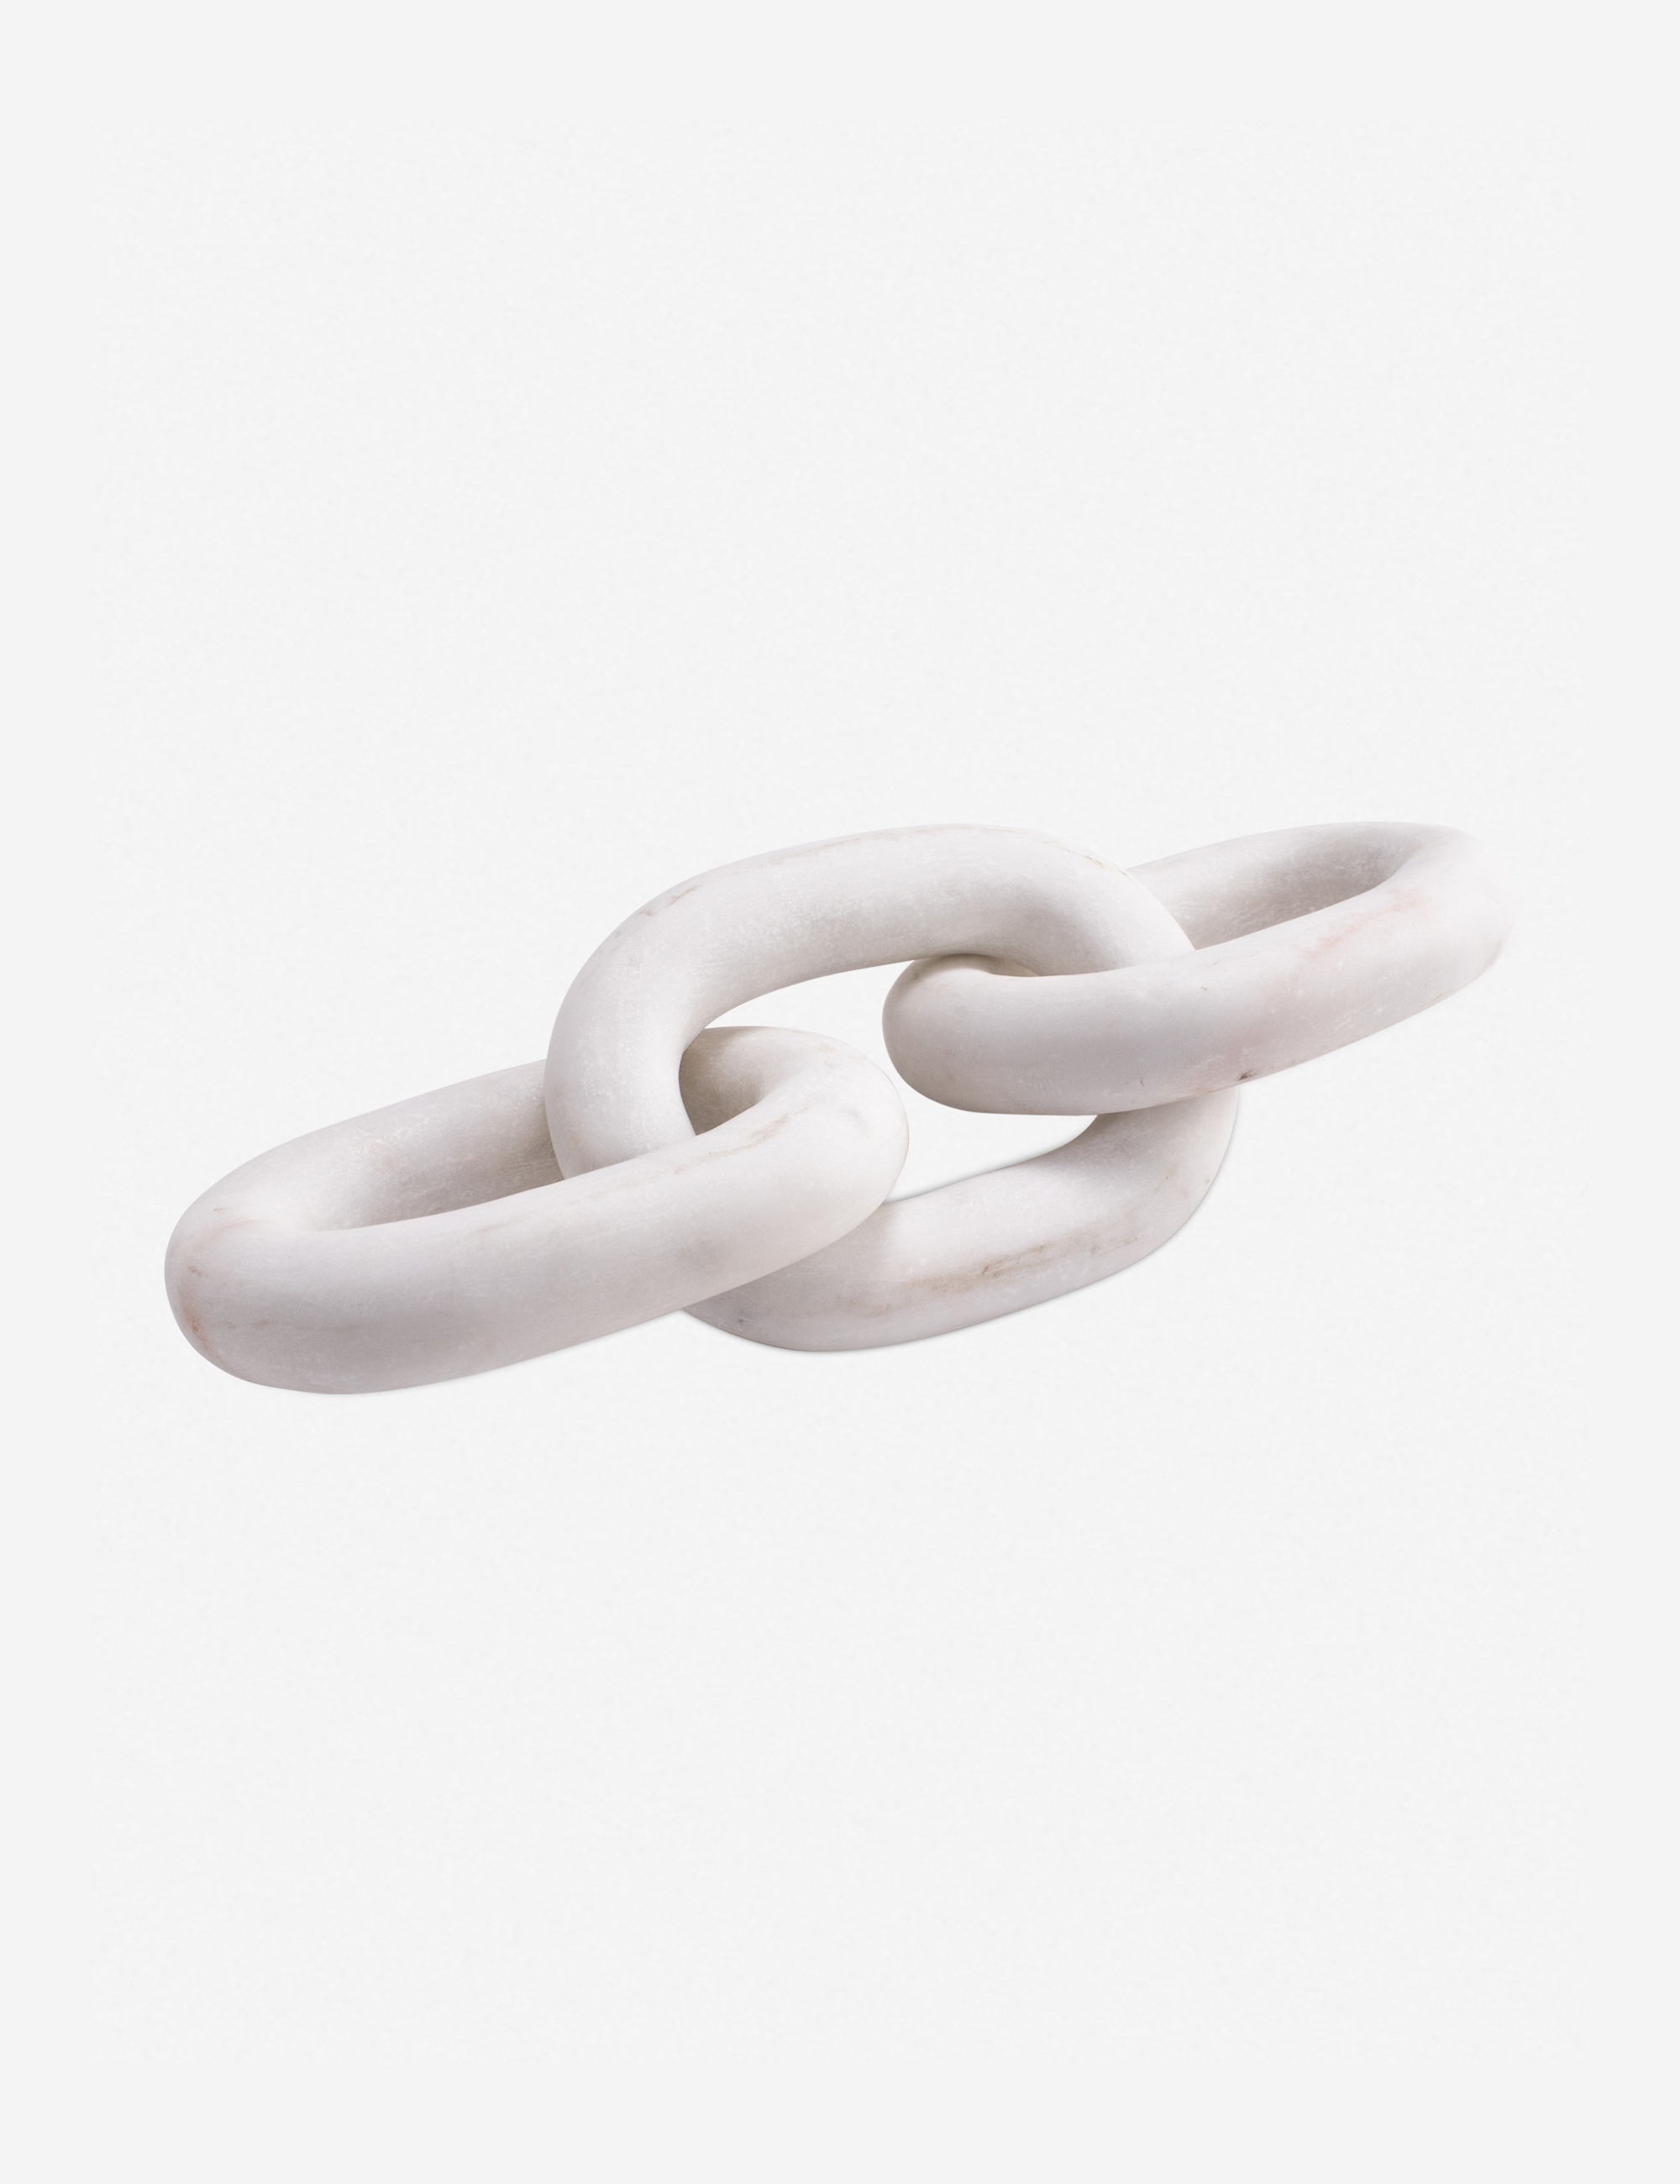 Atlas Marble Chain by Regina Andrew - Image 0